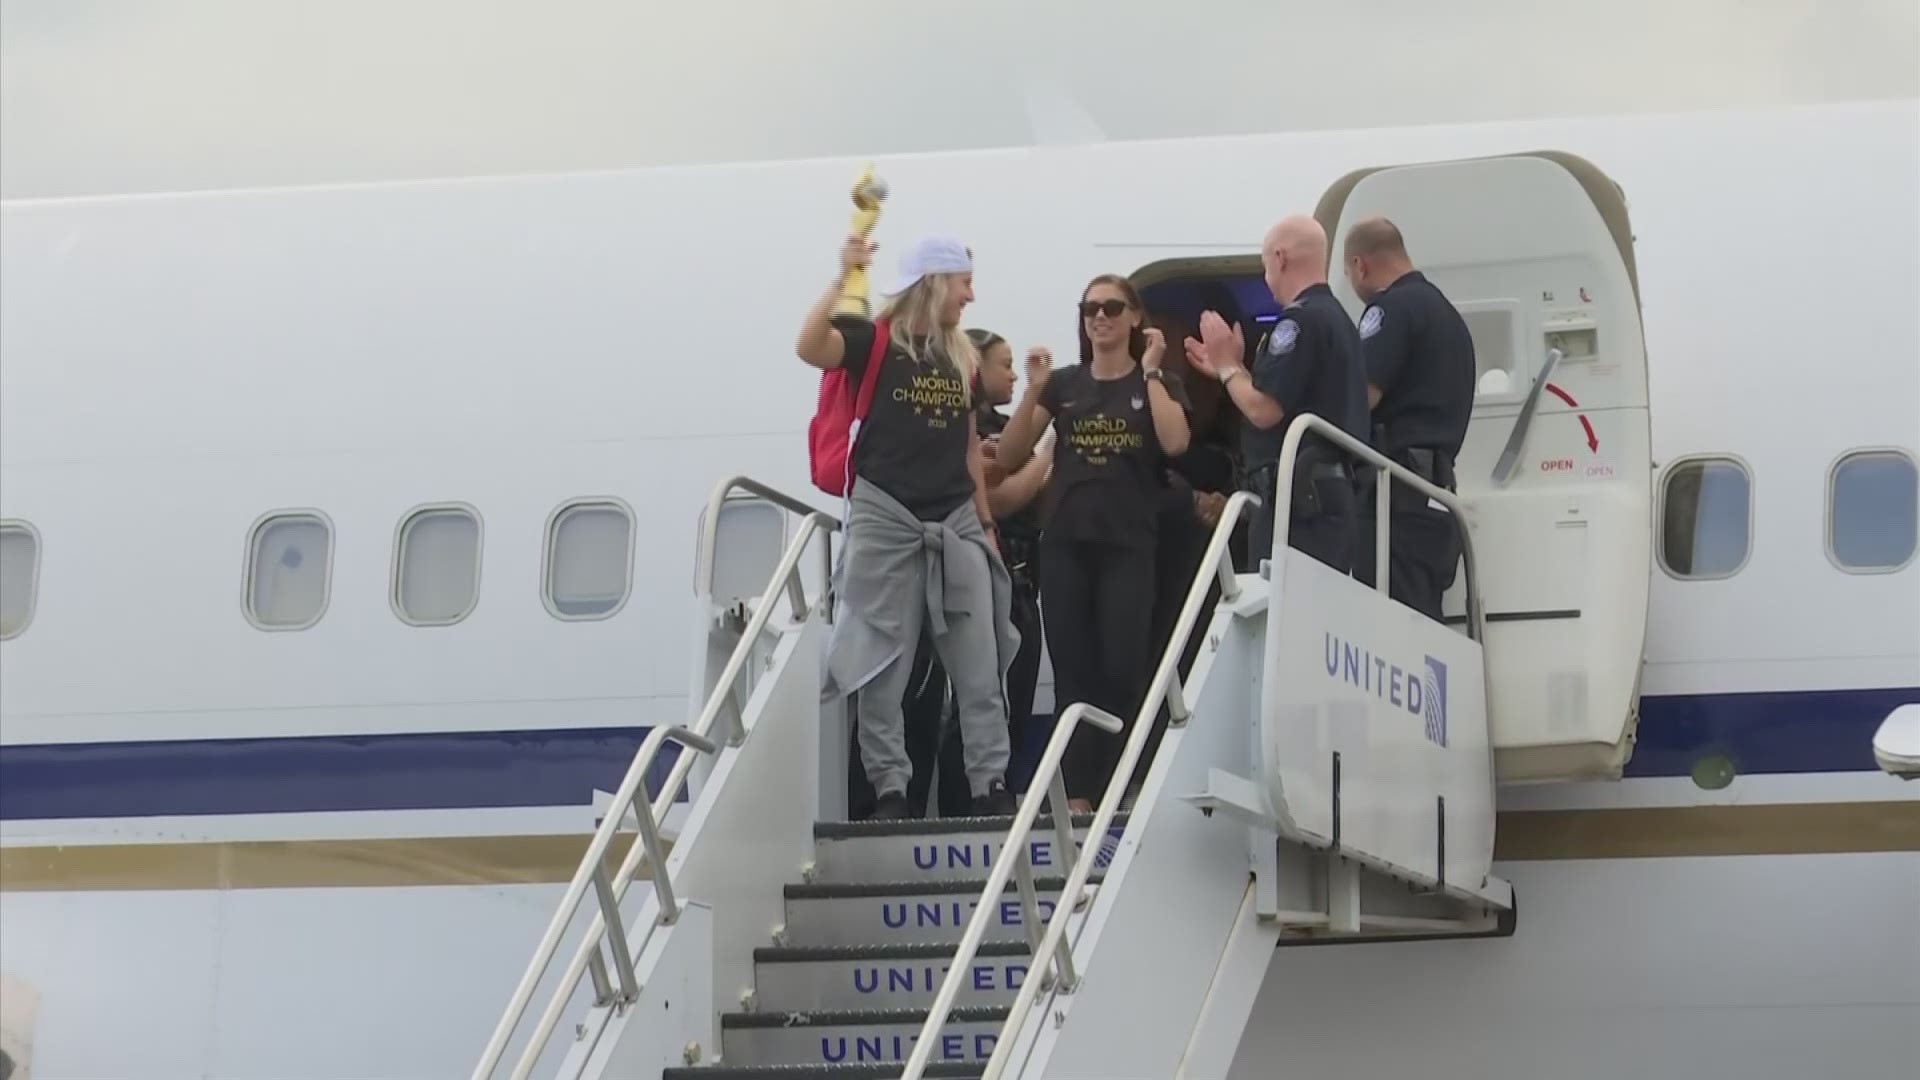 The U.S. women's national team arrived in New York on Monday, a day after beating the Netherlands 2-0 to capture a record fourth Women's World Cup title. (AP)